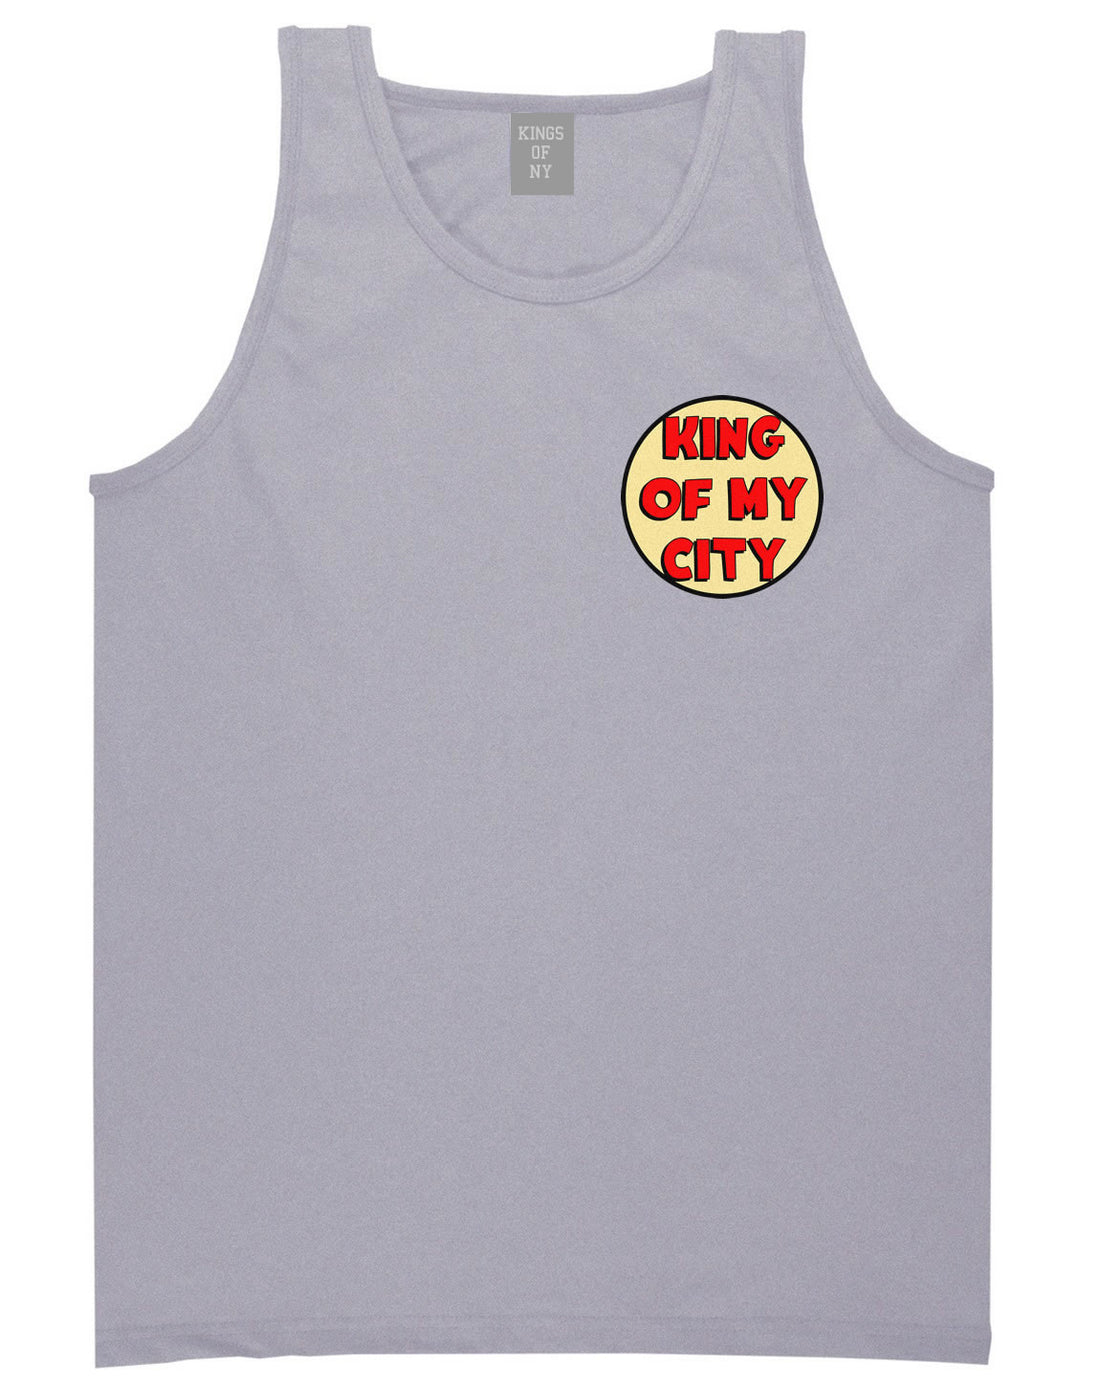 King Of My City Chest Logo Tank Top in Grey by Kings Of NY